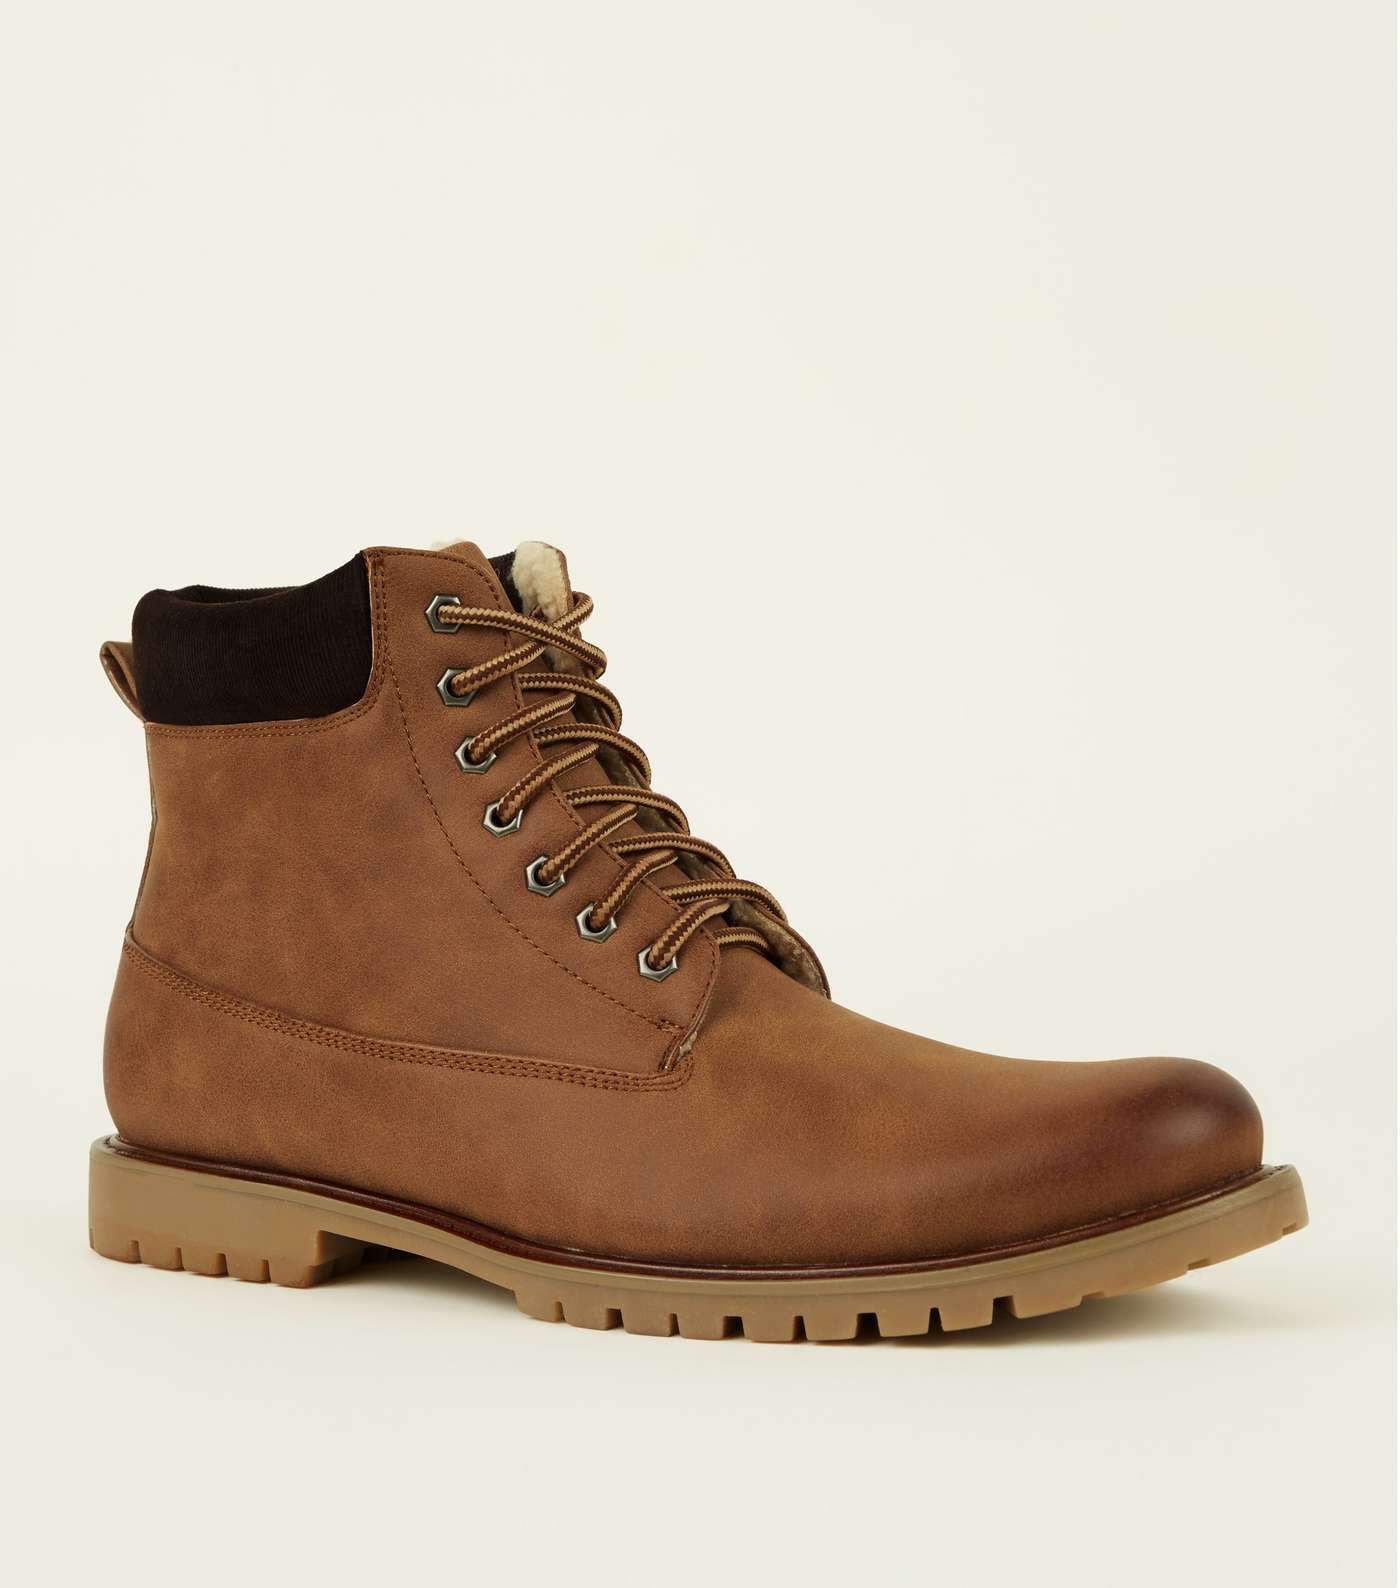 Tan Corduroy Trim Borg Lined Worker Boots  Image 2